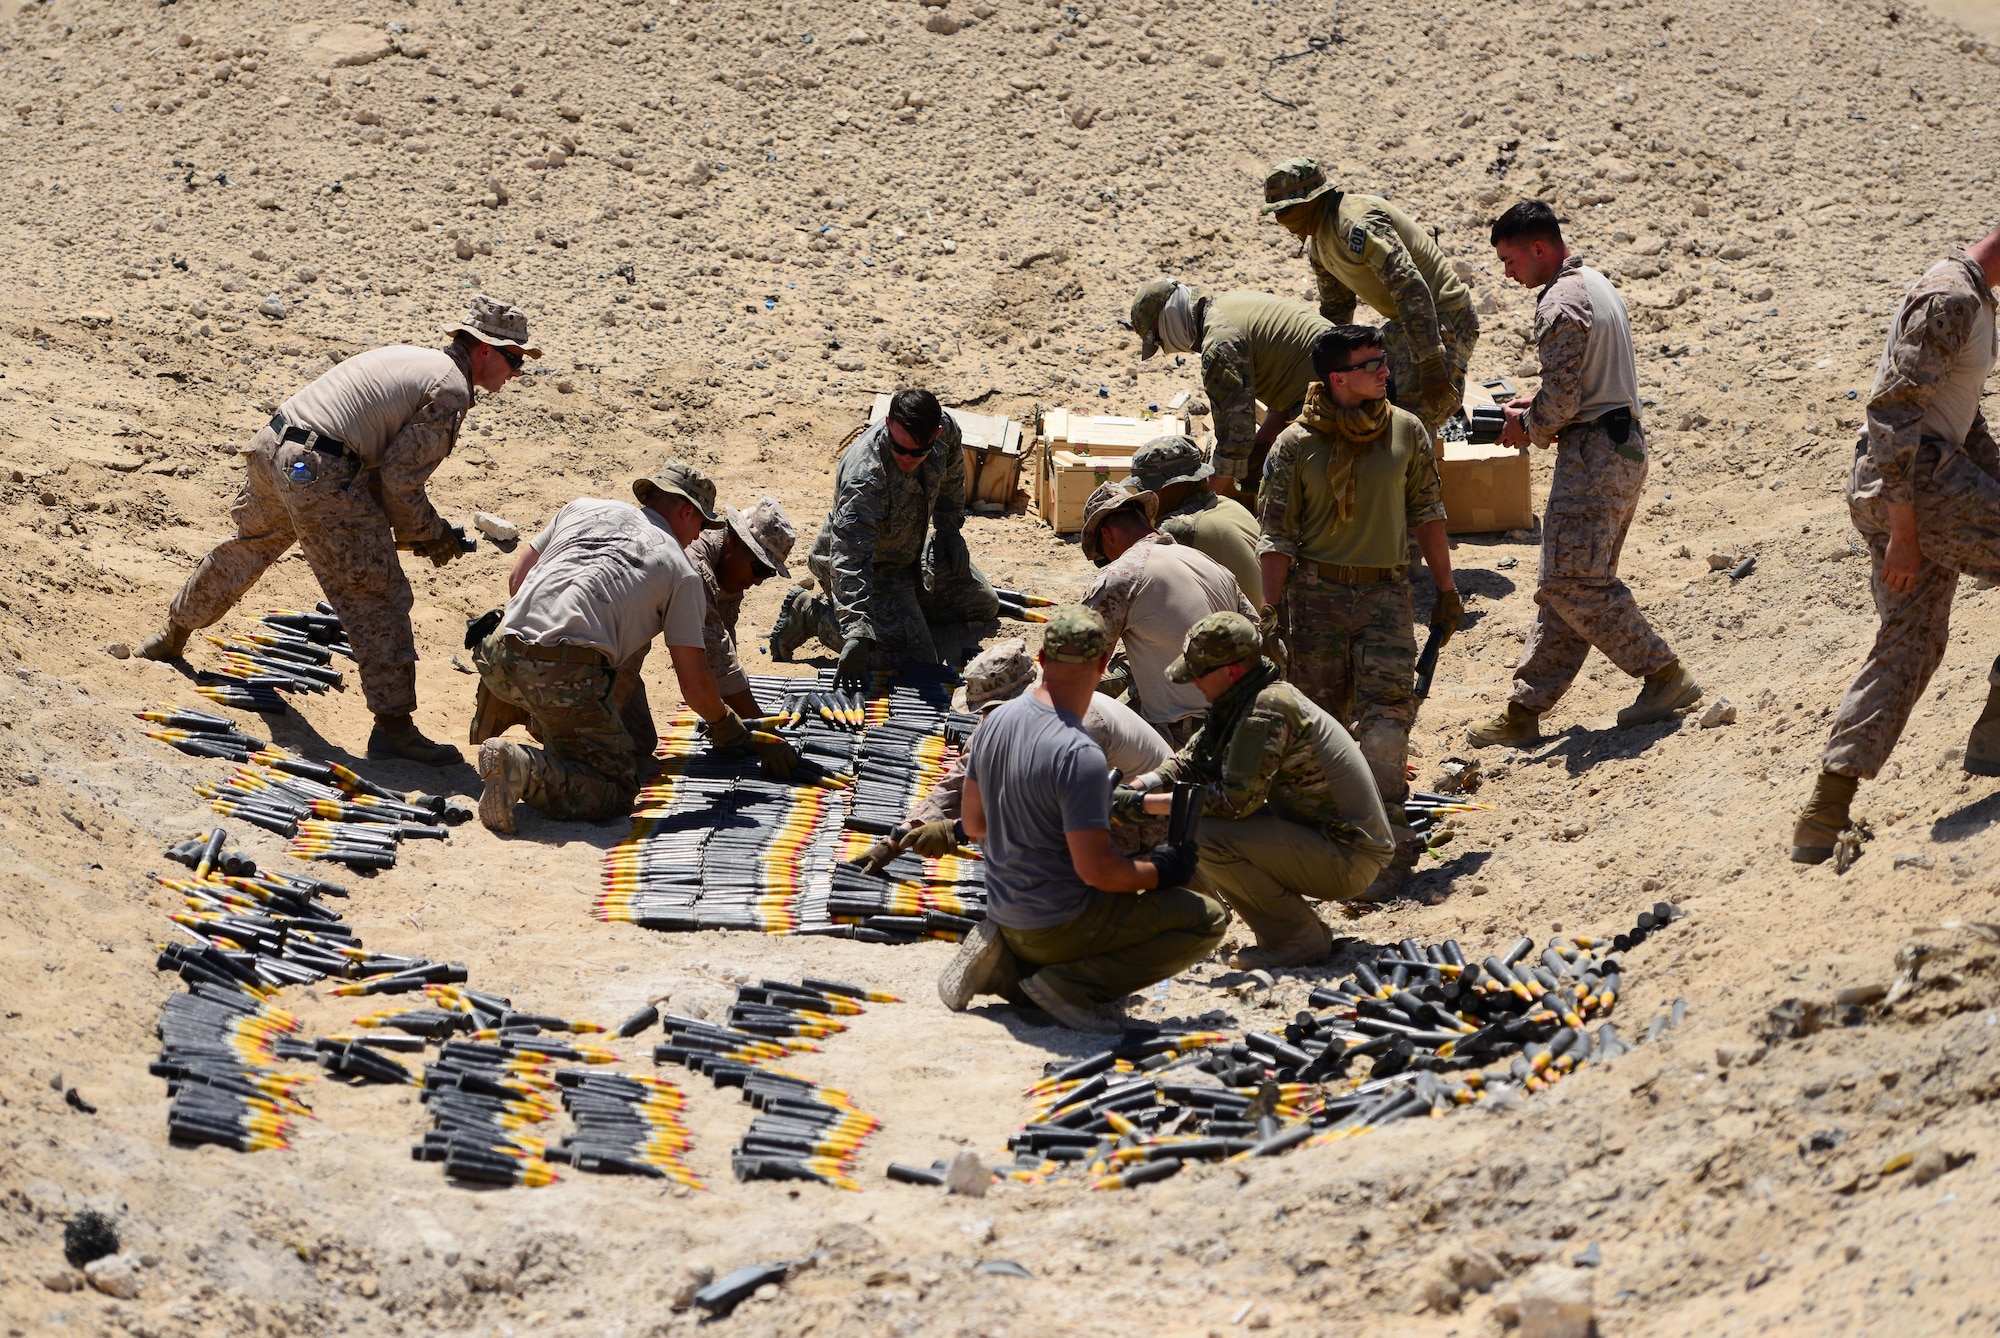 U.S. Air Force, U.S. Marine Corps and coalition partners assigned to the 407th Air Expeditionary Group prepare more than 5,000 pieces of unserviceable 30mm rounds and aircraft decoy flares for a coordinated detonation at the bomb range in Southwest Asia on June 6, 2017. Explosive ordnance disposal technicians are charged with locating, identifying, disarming, neutralizing, recovering, and disposing of hazardous explosives; conventional, chemical, biological, incendiary, and nuclear ordnance; and criminal or terrorist devices. (U.S. Air Force photo by Tech Sgt. Andy M. Kin)